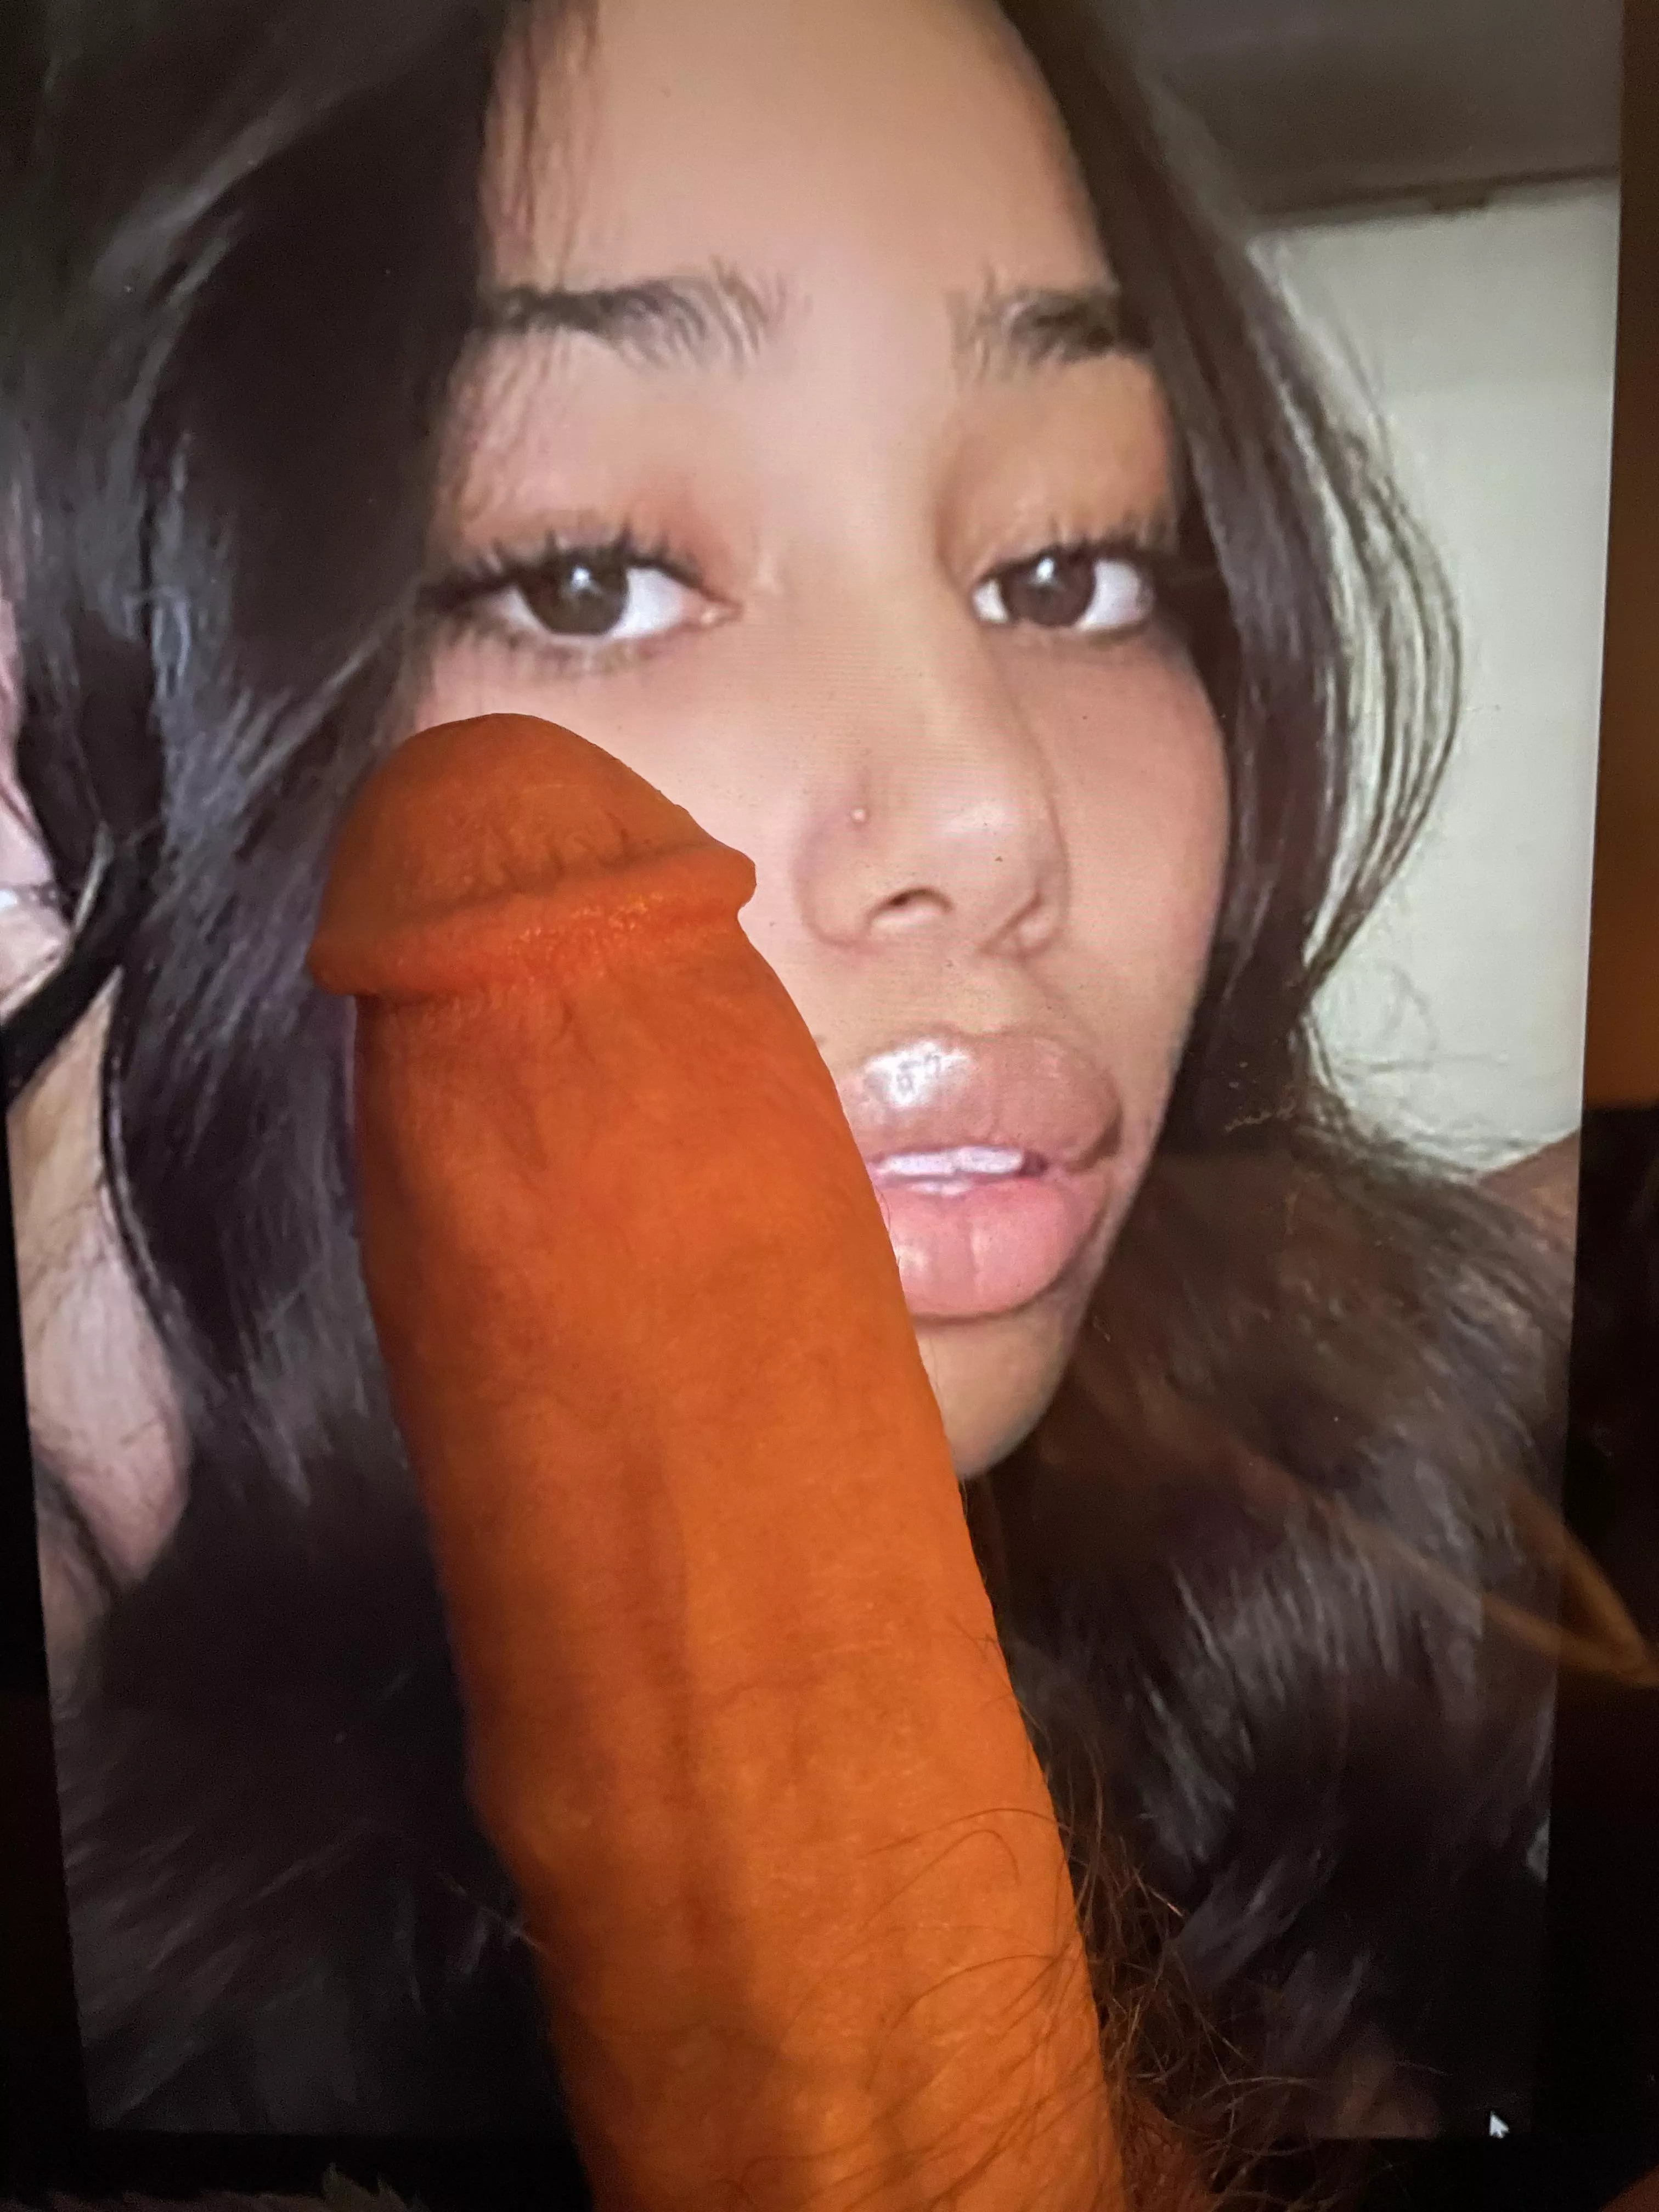 I want to give my bwc to all your nonwhite girls! Asian, black, middle  eastern, all for bwc! K-sissysydneysenpai nudes : NSFW_Tributes |  NUDE-PICS.ORG